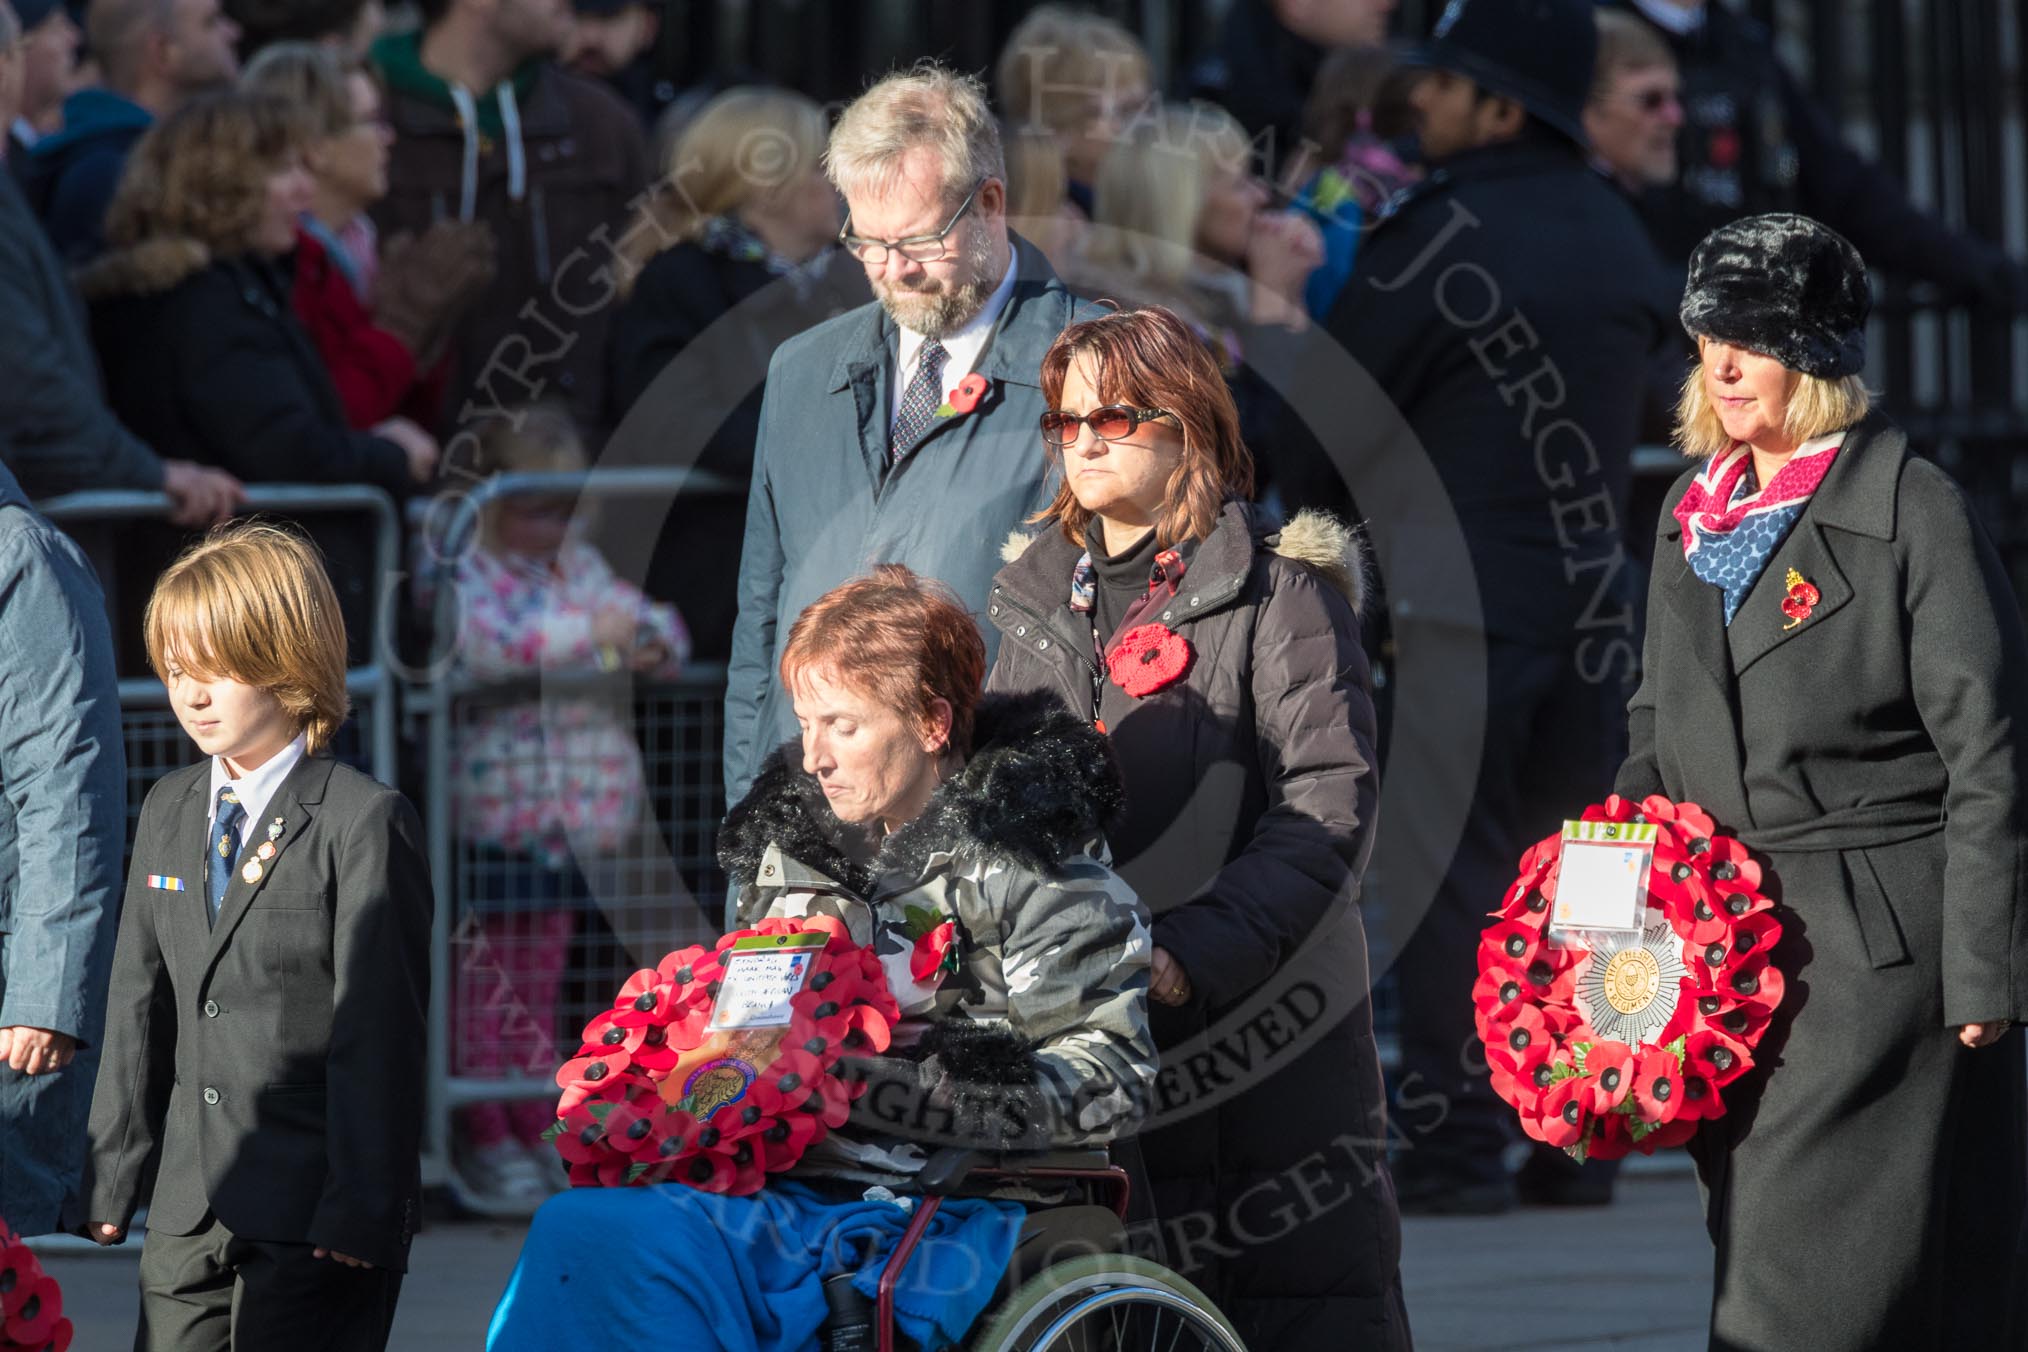 March Past, Remembrance Sunday at the Cenotaph 2016: M22 The Royal British Legion - Civilians.
Cenotaph, Whitehall, London SW1,
London,
Greater London,
United Kingdom,
on 13 November 2016 at 13:16, image #2676